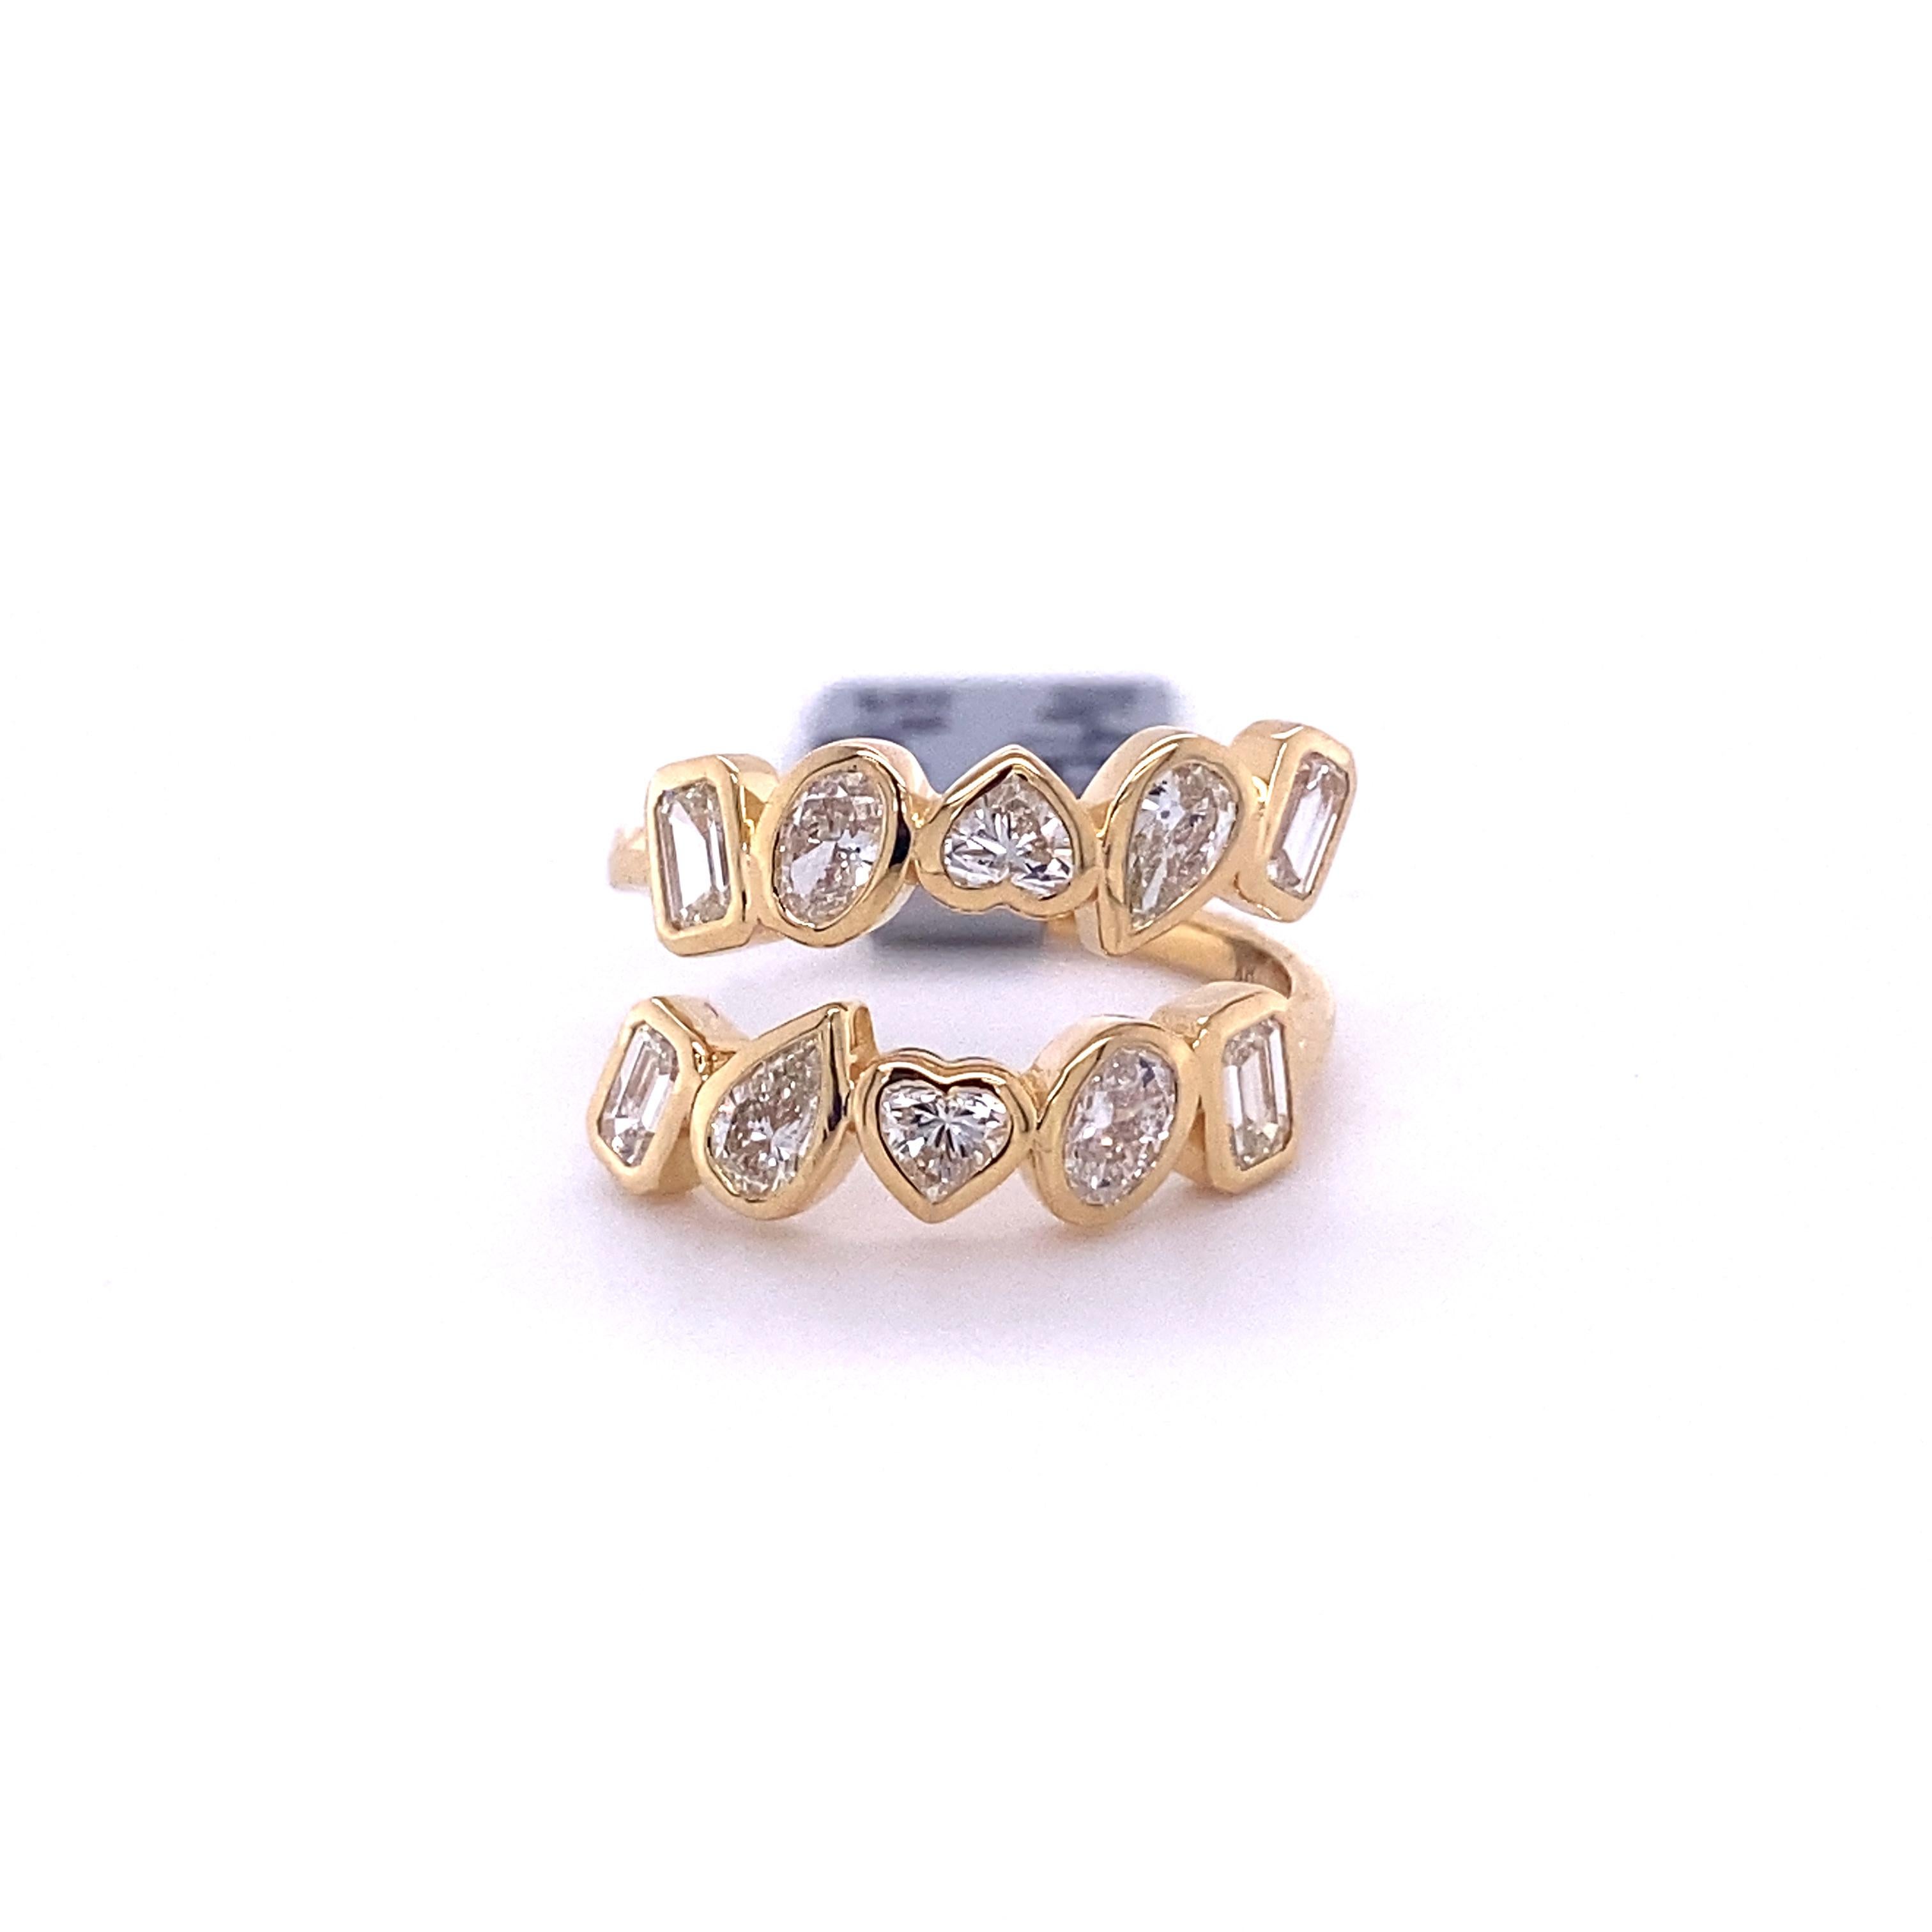 Multishape diamond eternity band with 10 hand set diamonds in varying diamond shapes.

1.42 carats of white pear, oval, heart and emerald cut diamonds set in 18k yellow gold.

